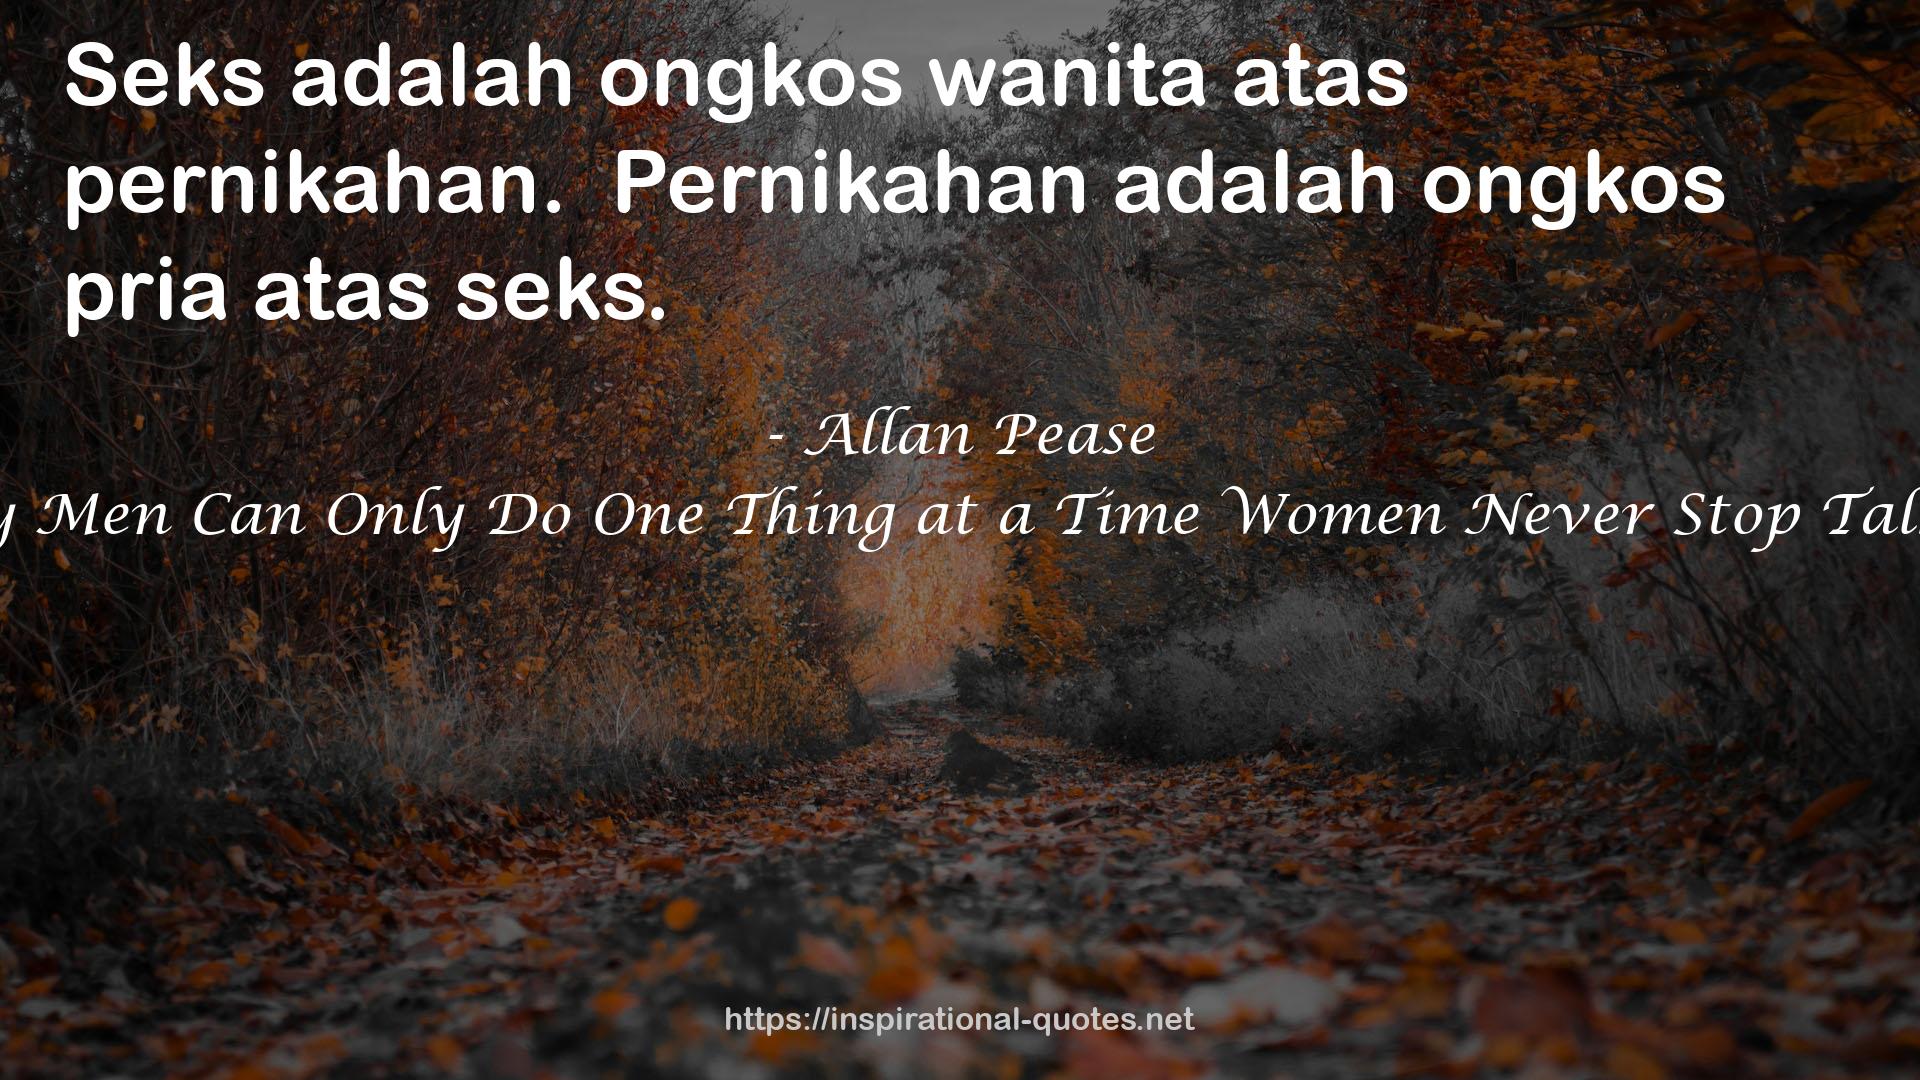 Why Men Can Only Do One Thing at a Time Women Never Stop Talking QUOTES